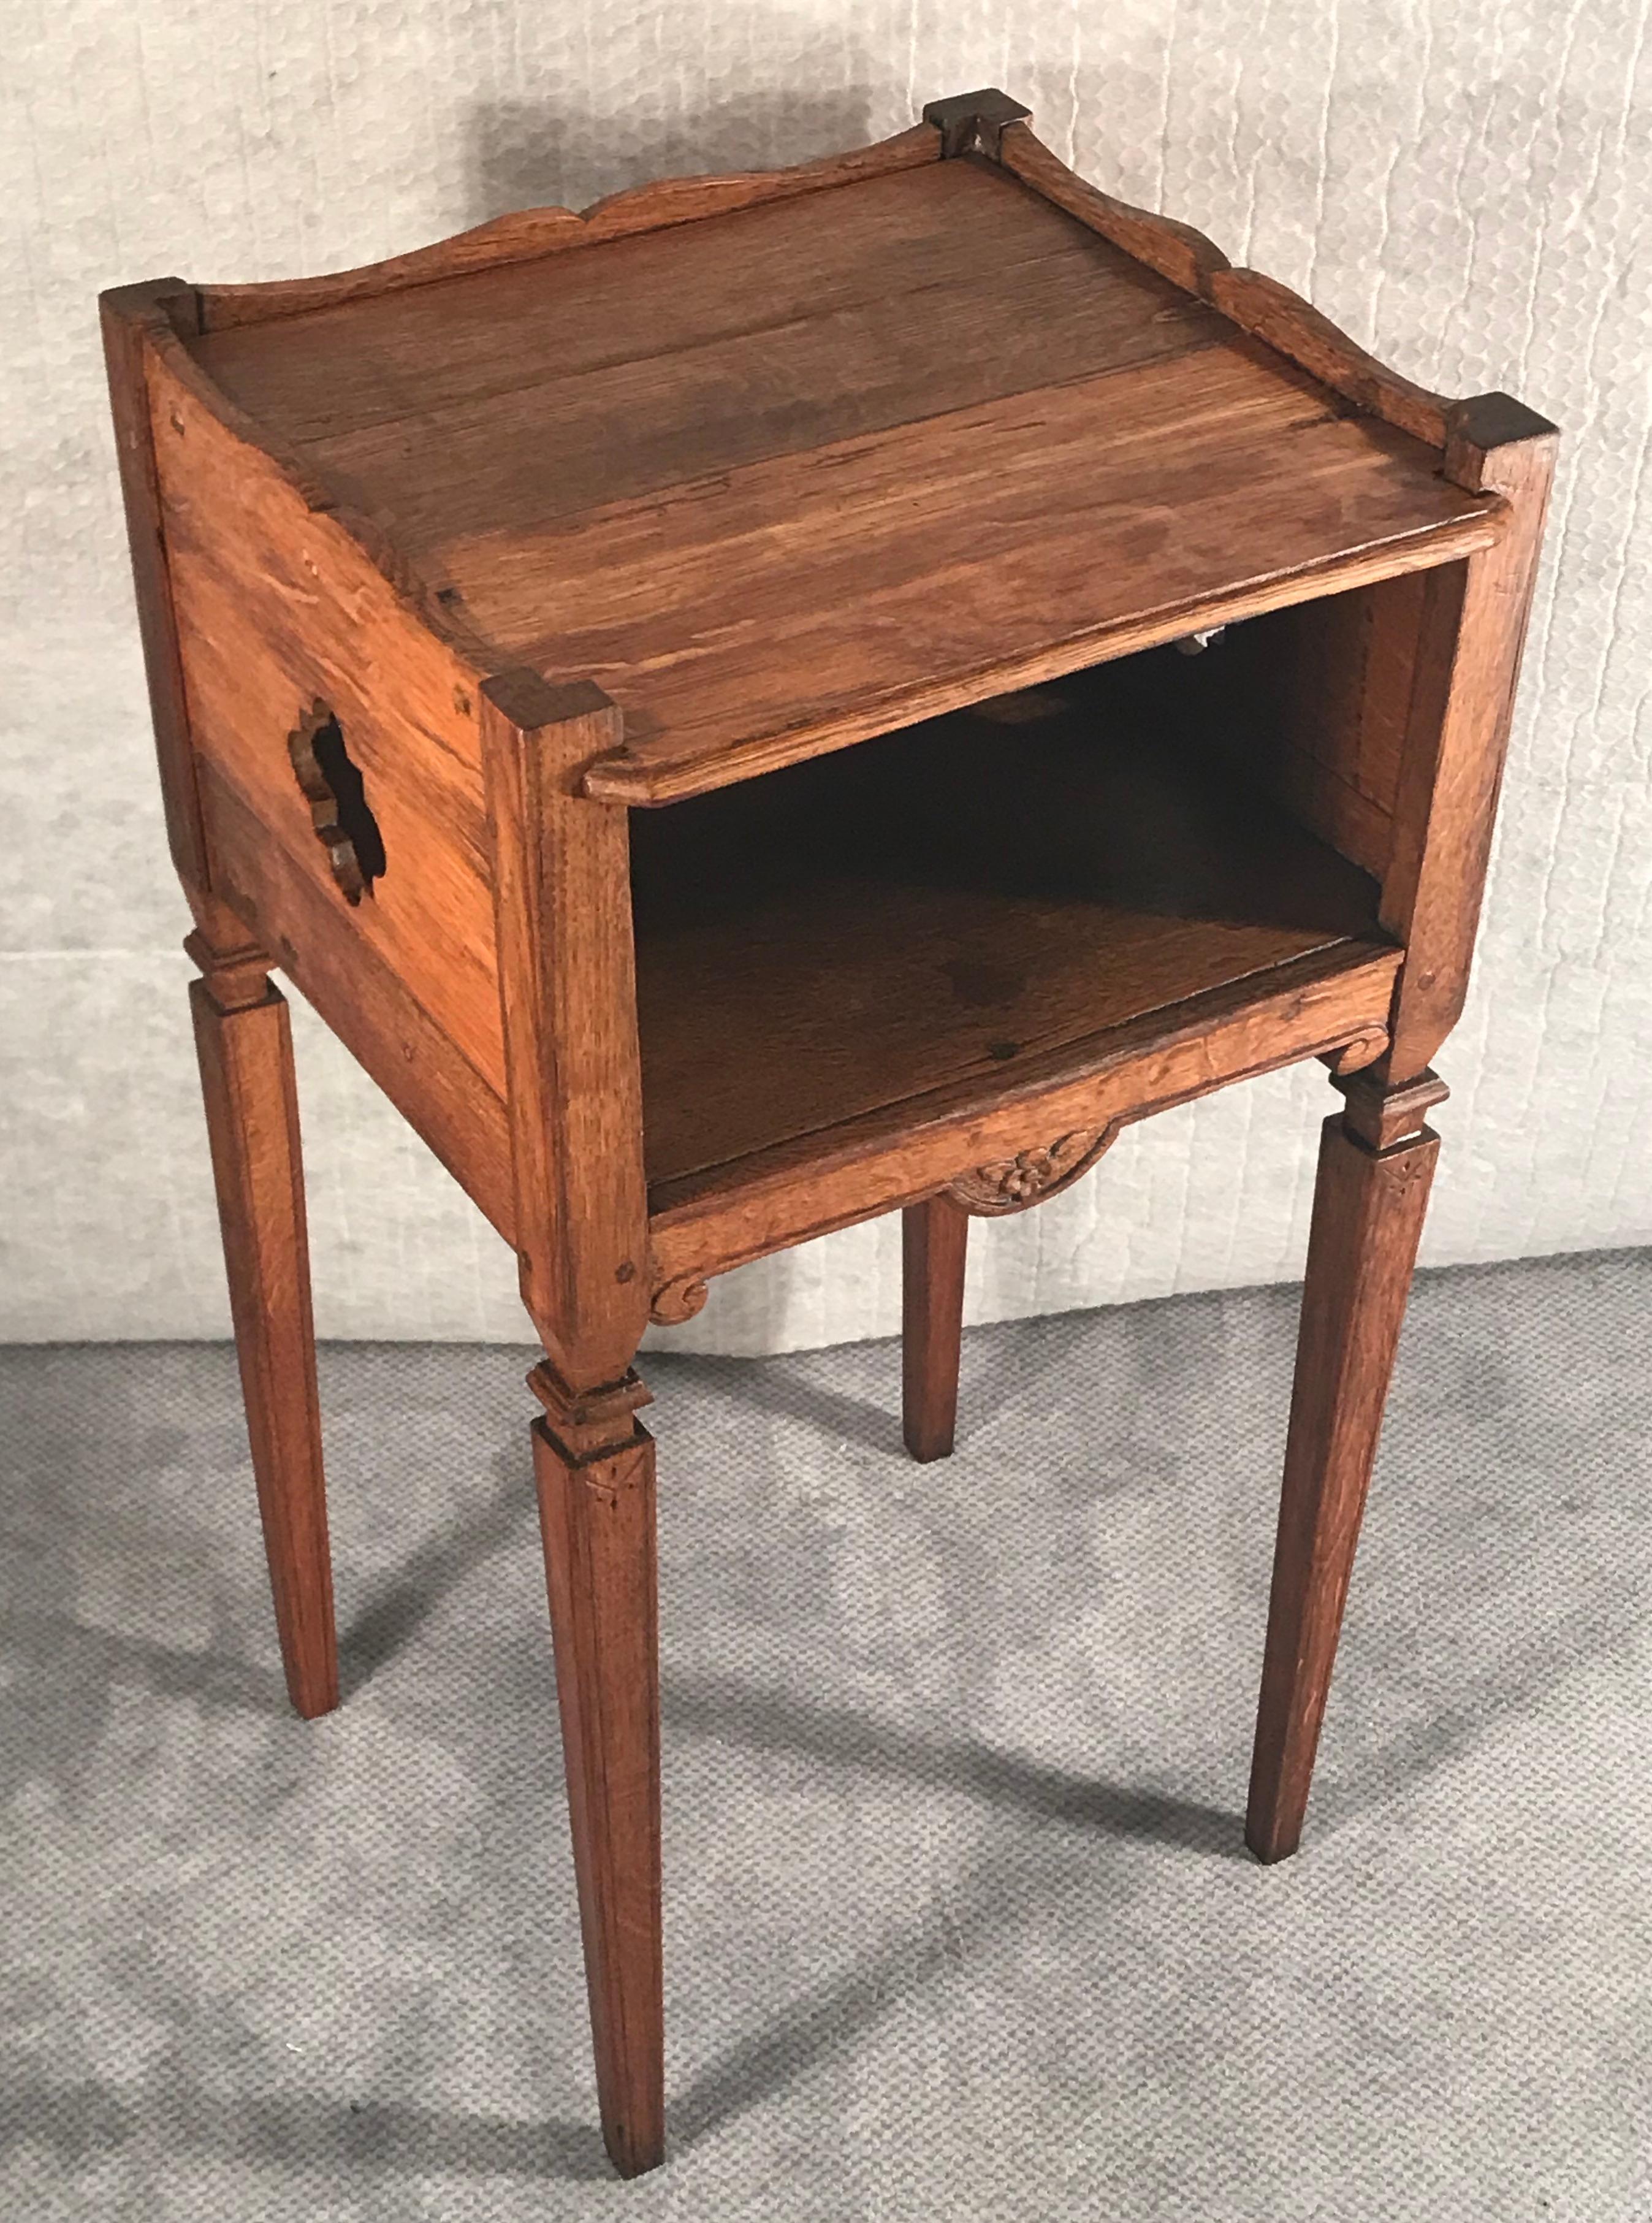 Two French provincial Baroque style bed side tables or nightstands. 
The farm style tables date back to around 1800. They are made of massif oak wood and have some very pretty carved decorations. Both of them have an open compartment with an open